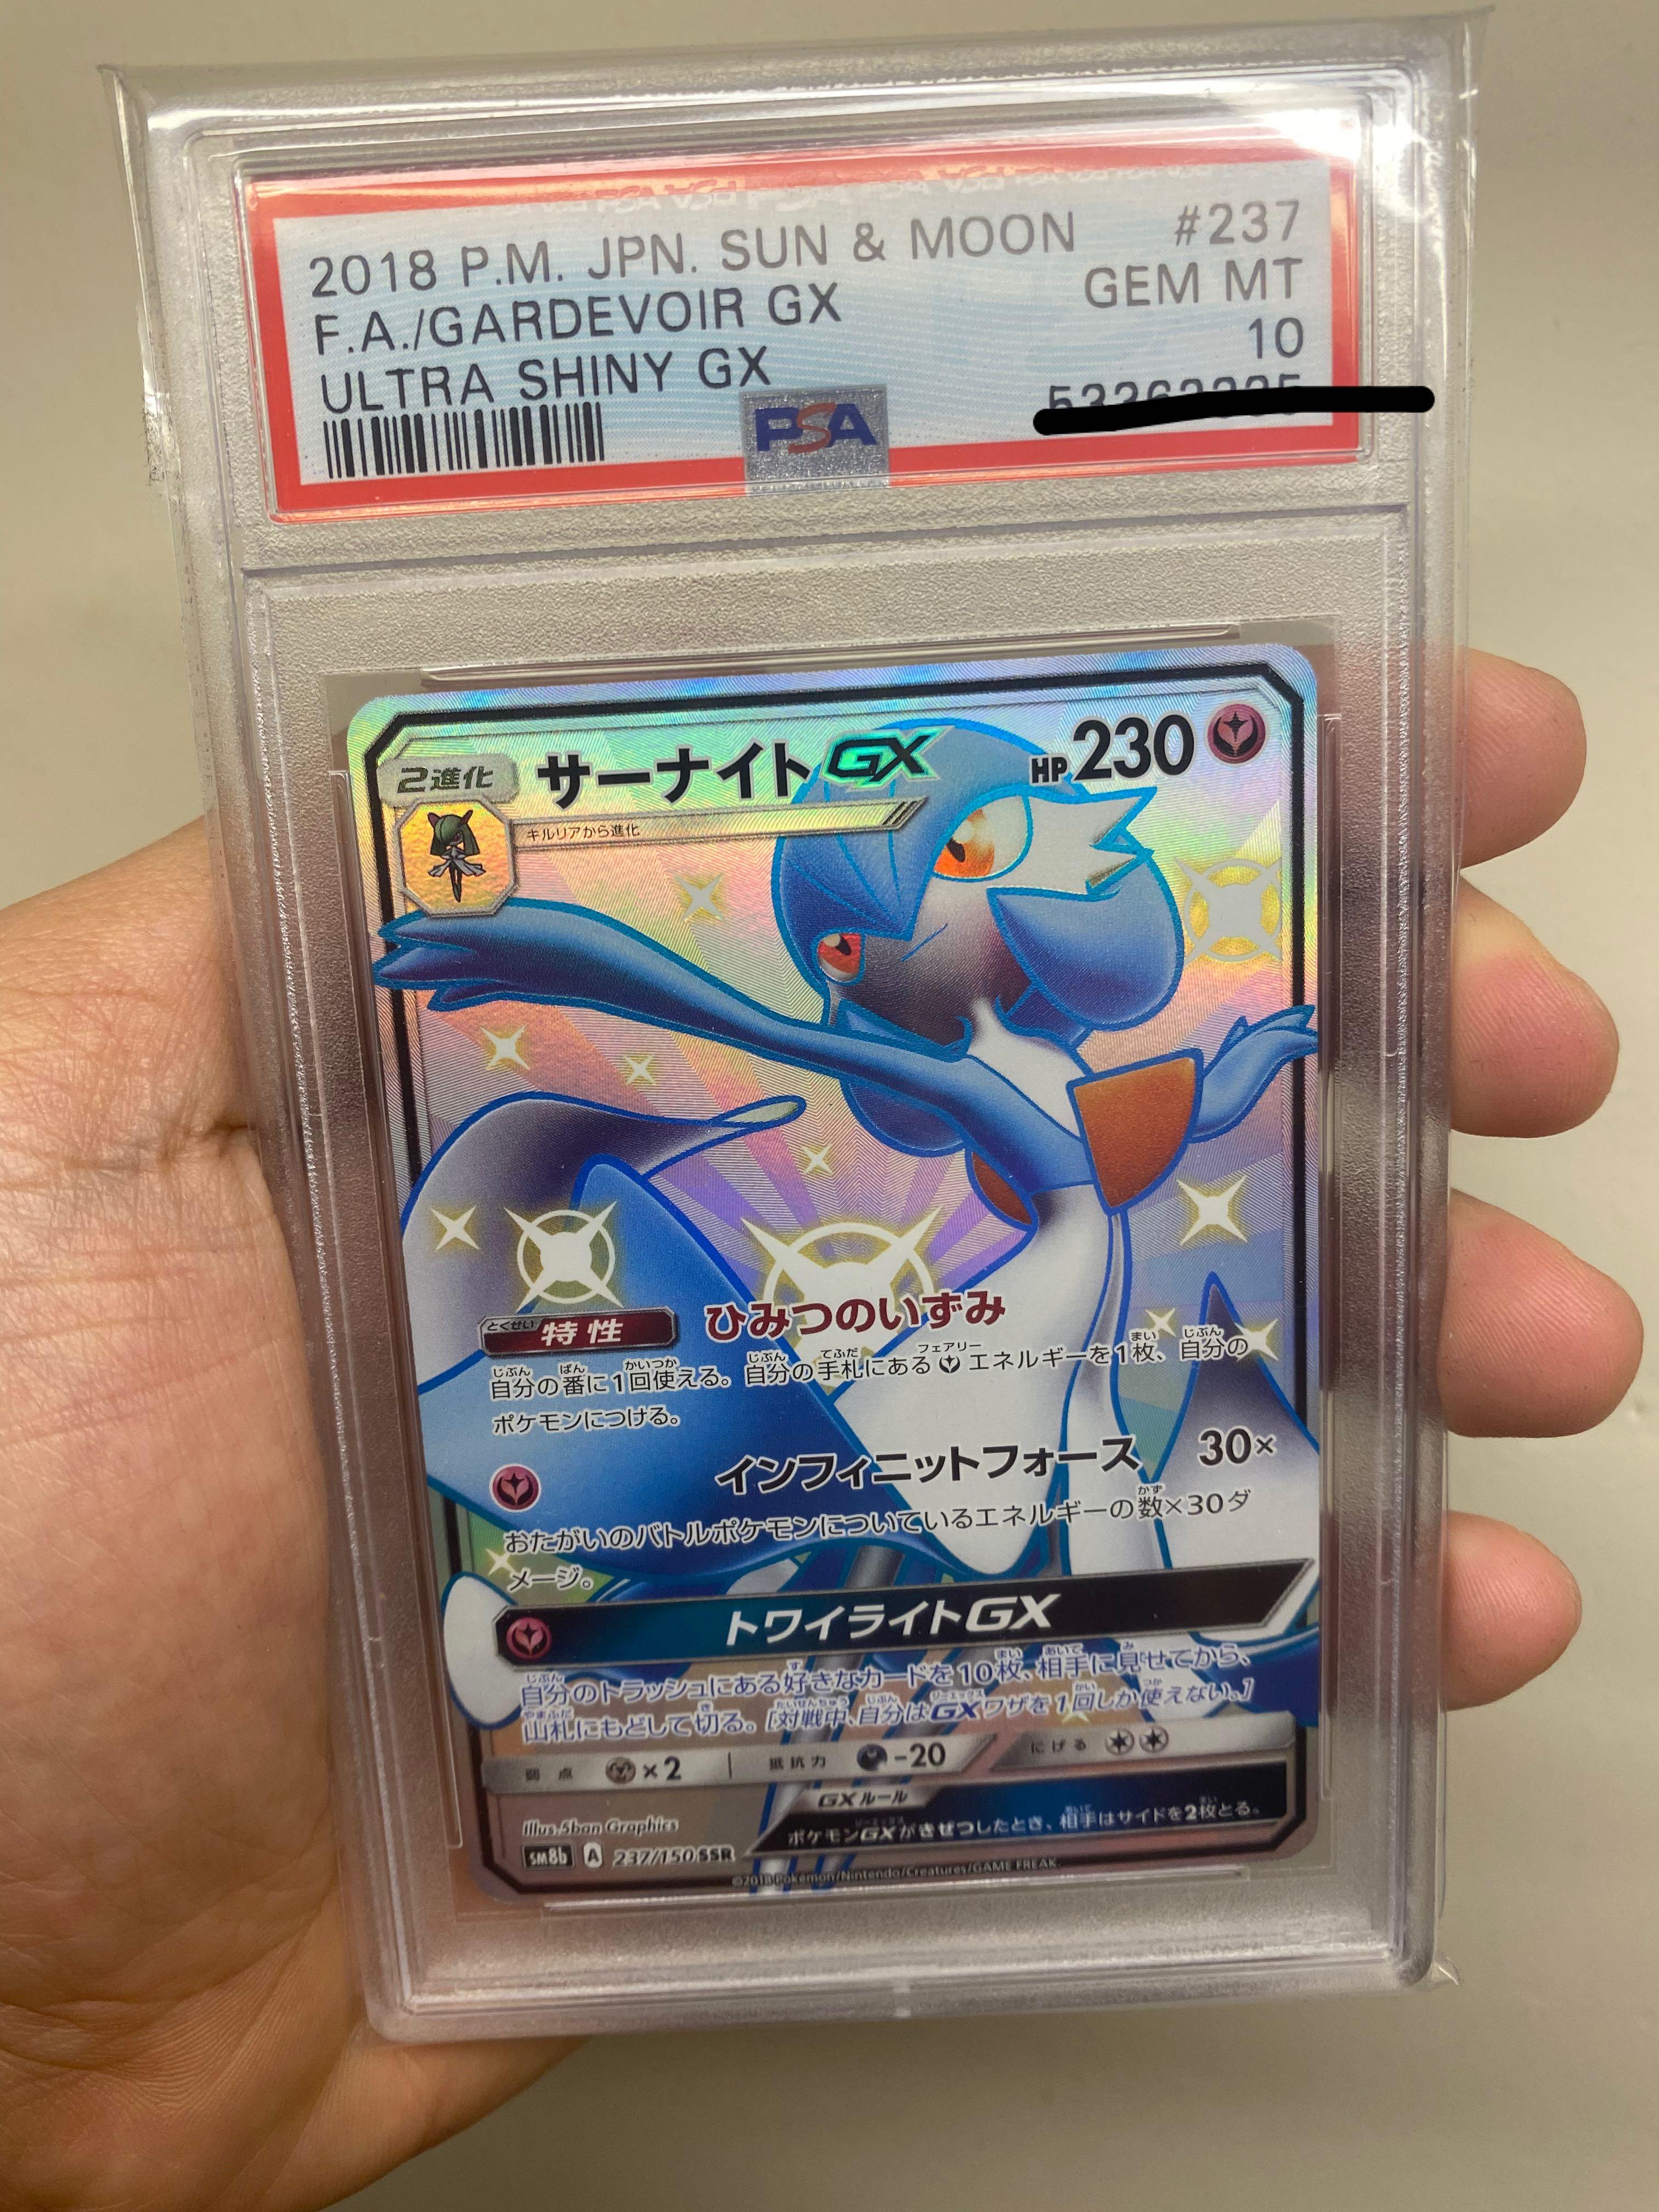 A Shiny Gardevoir Pokémon Distribution Is Happening In Japan This